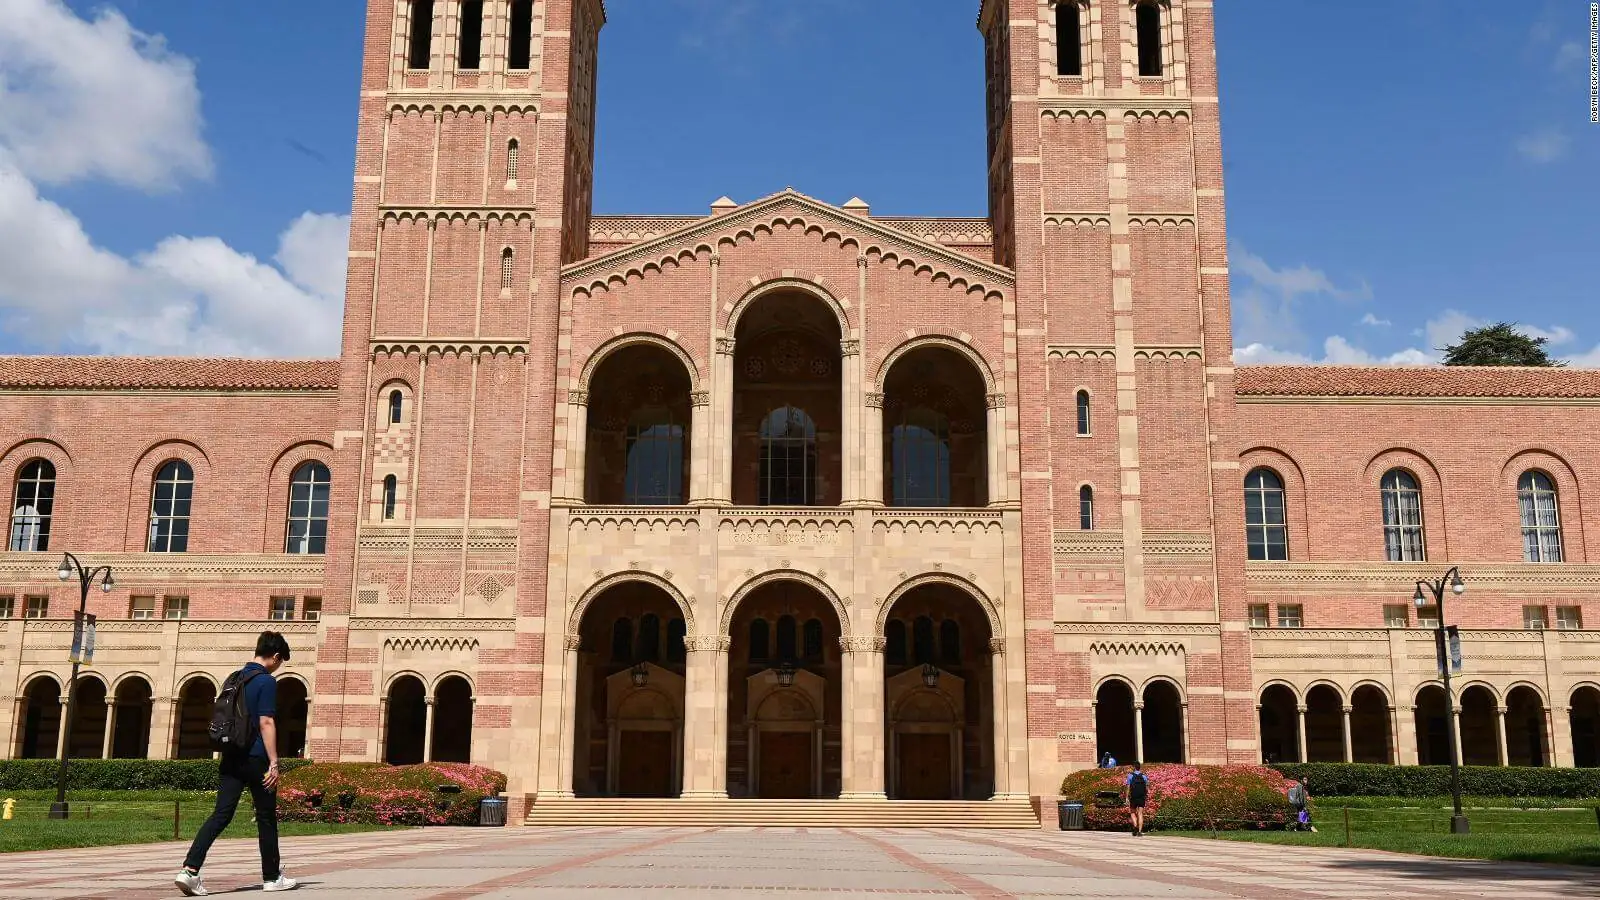 The Regents of the University of California Awards YuJa Systemwide Purchase Agreement